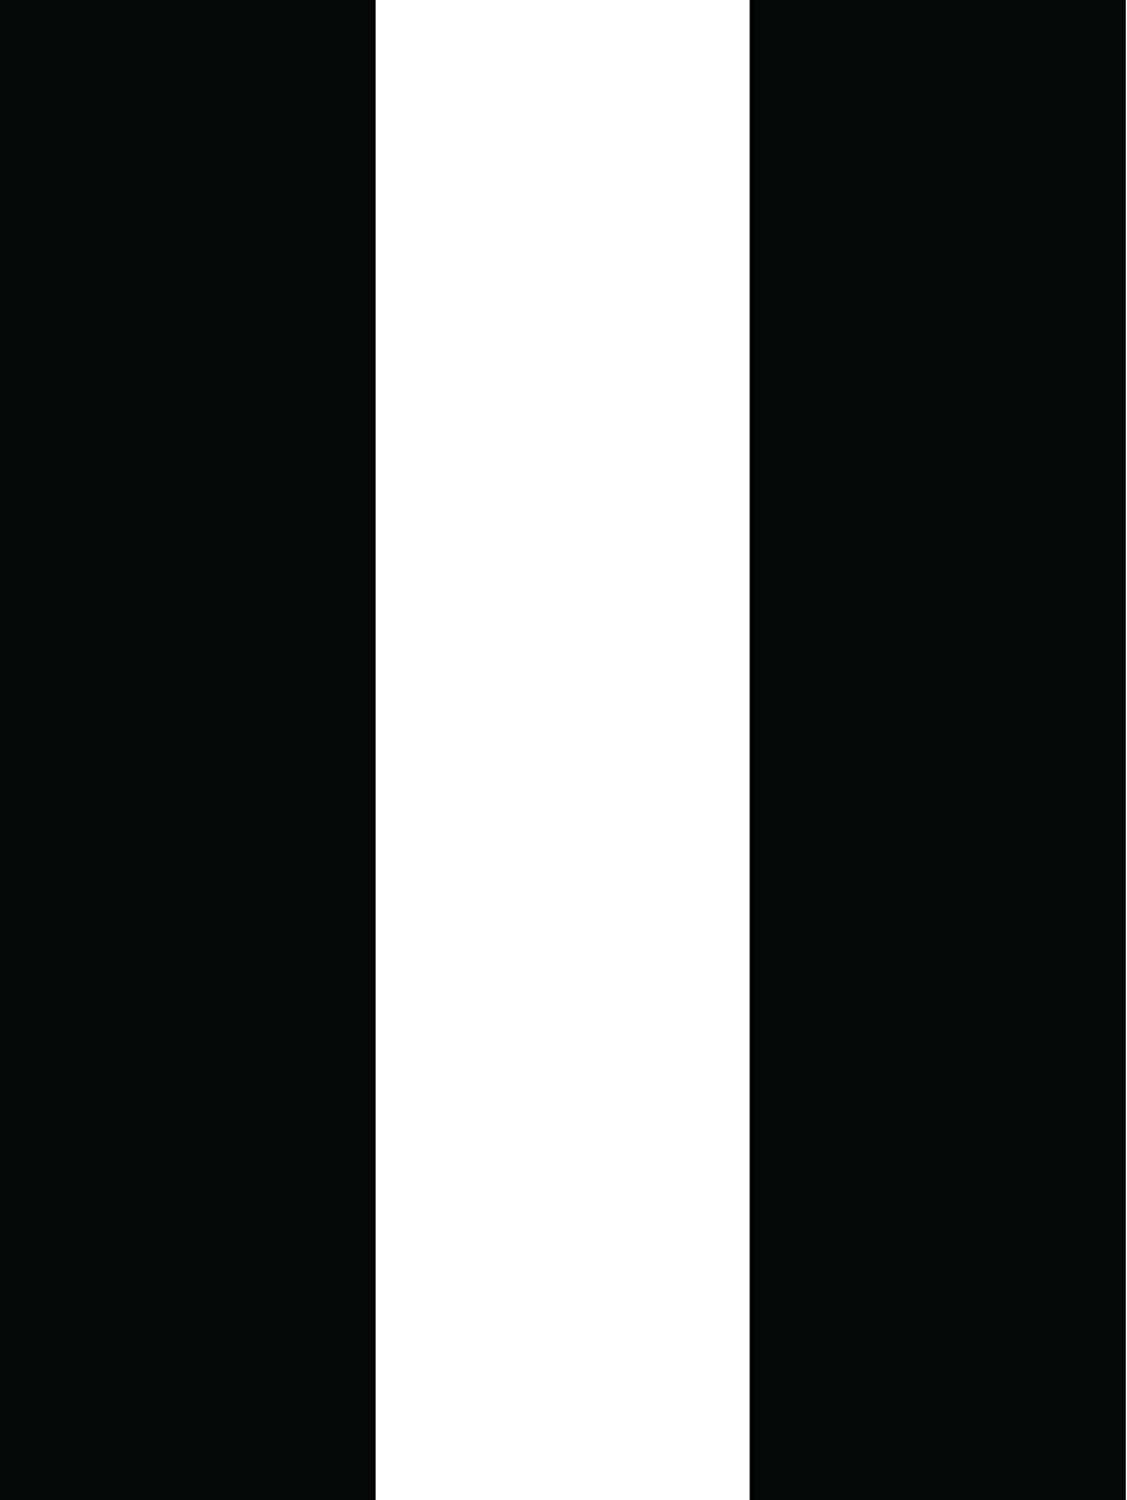 A Black And White Striped Banner With A White Stripe